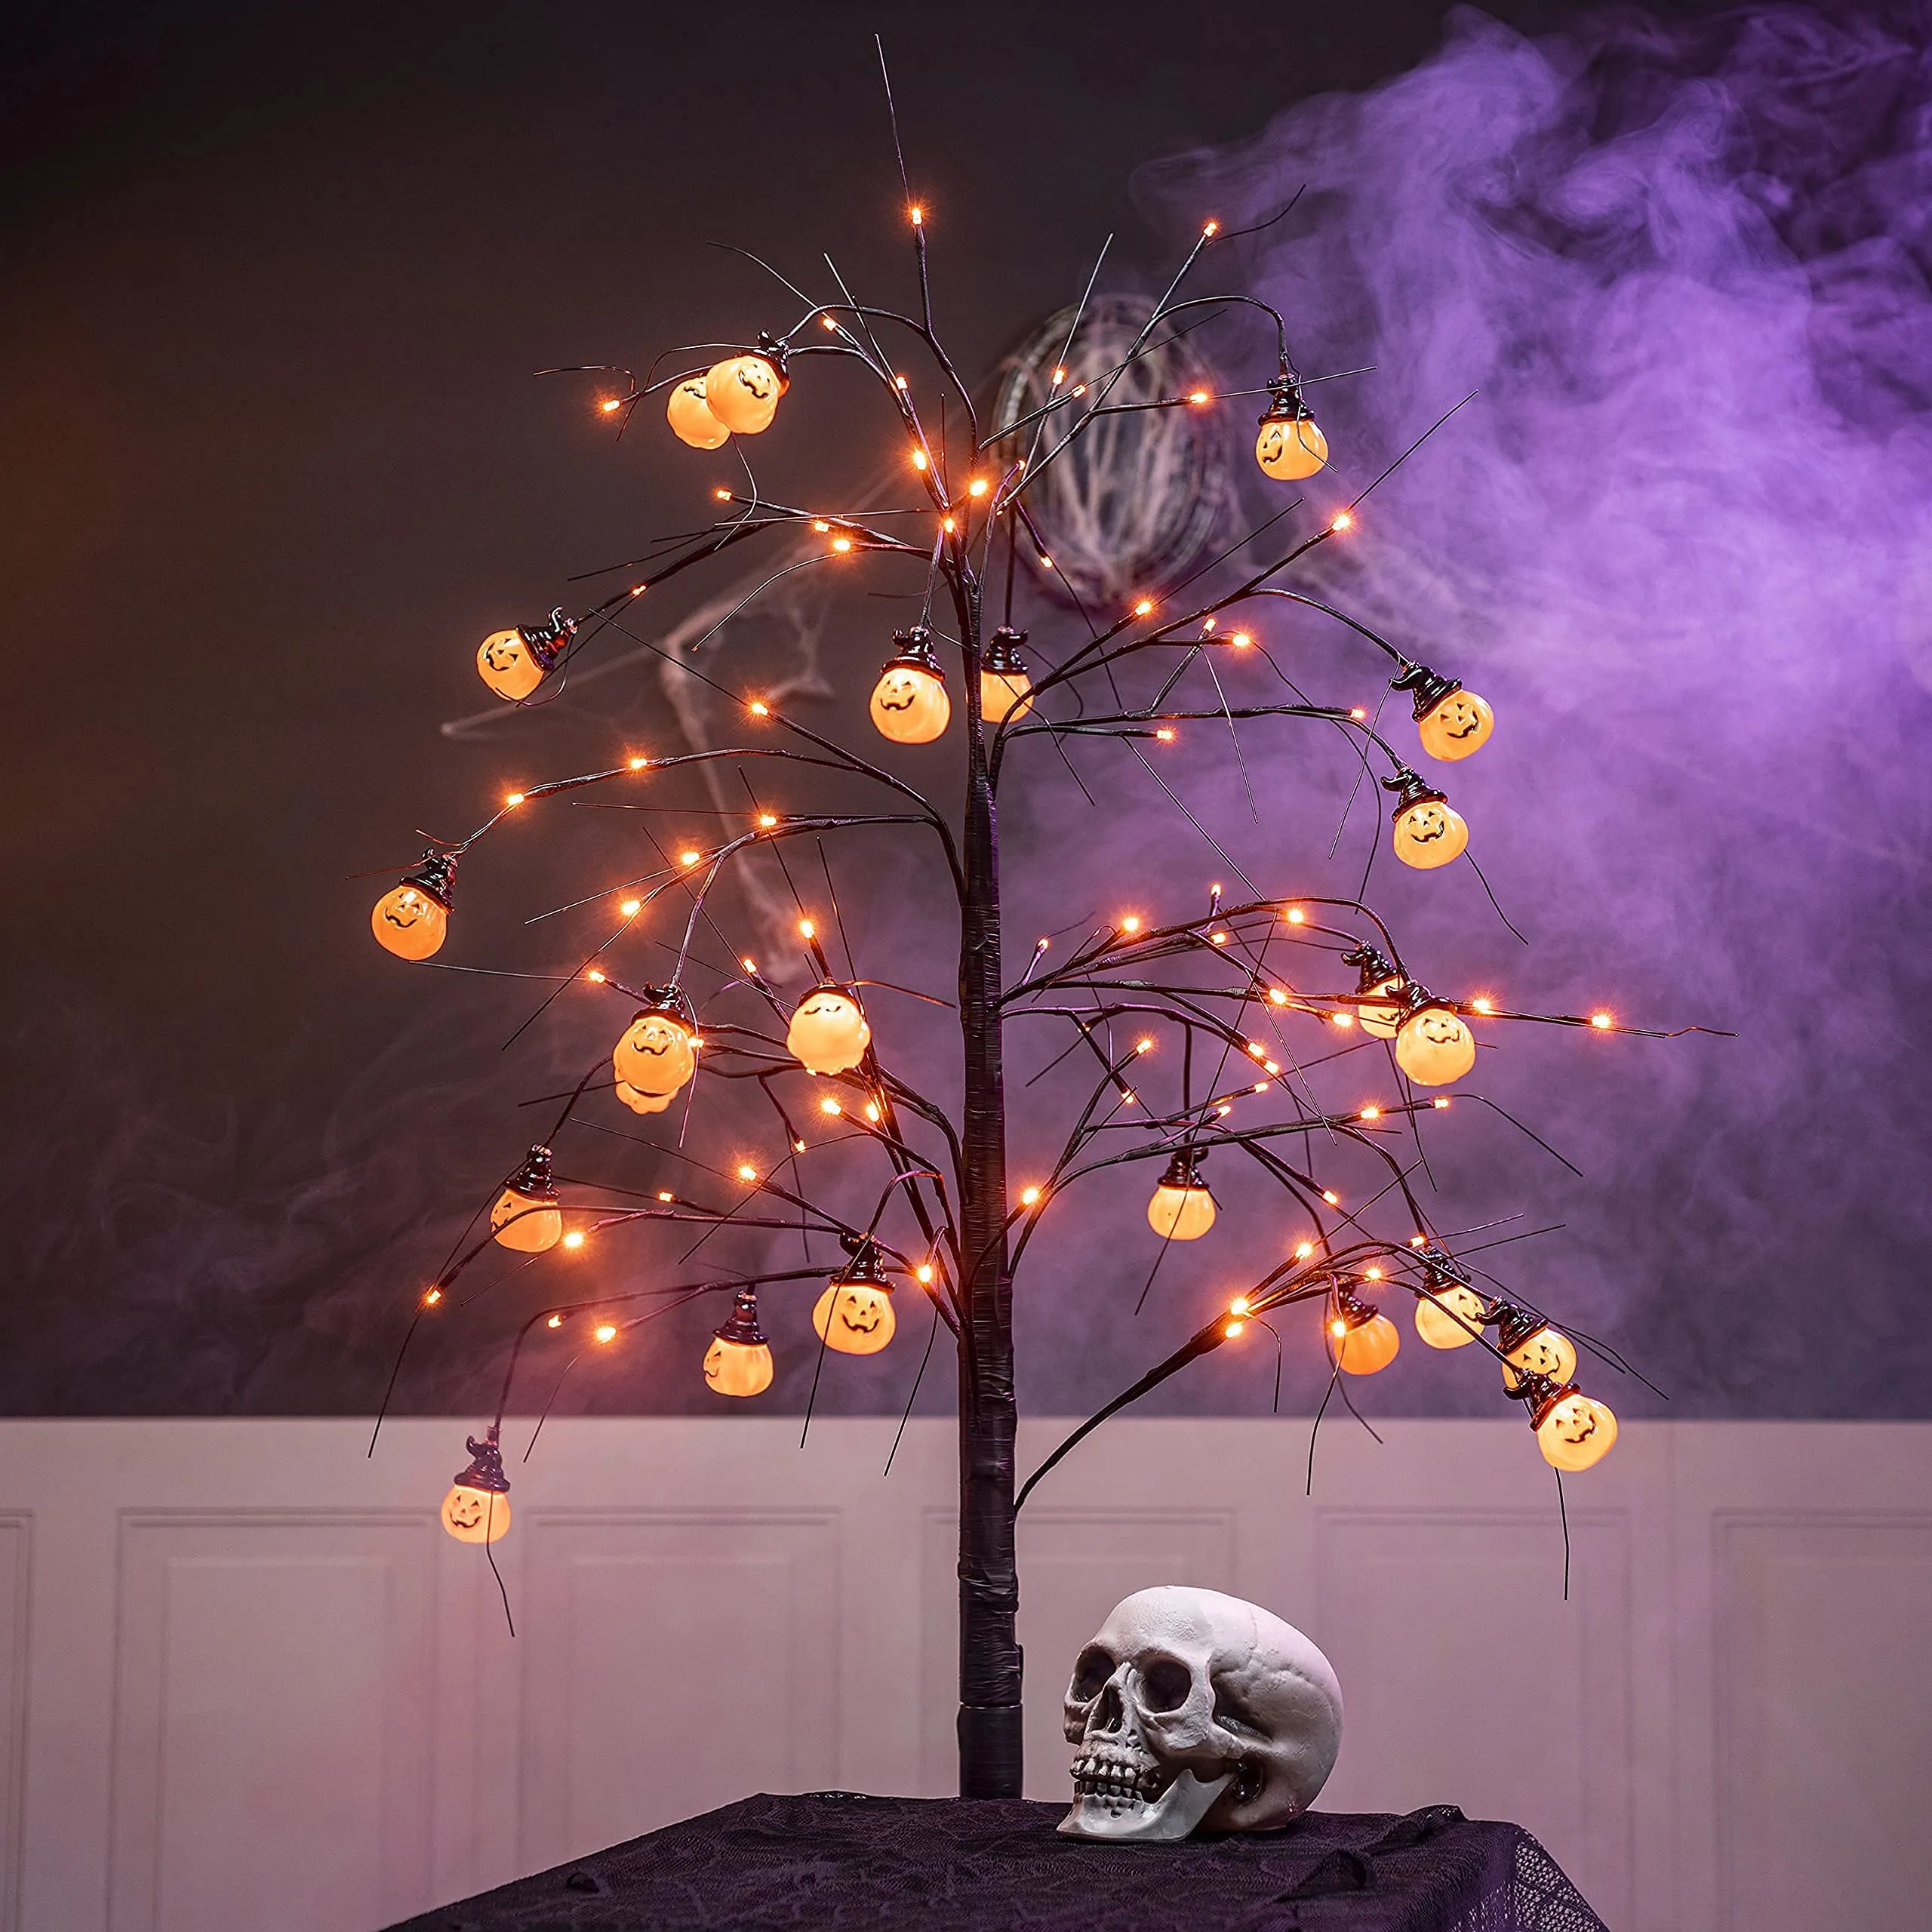 You are currently viewing Halloween Tree Decorations Ideas for Indoor and Outdoor Decor